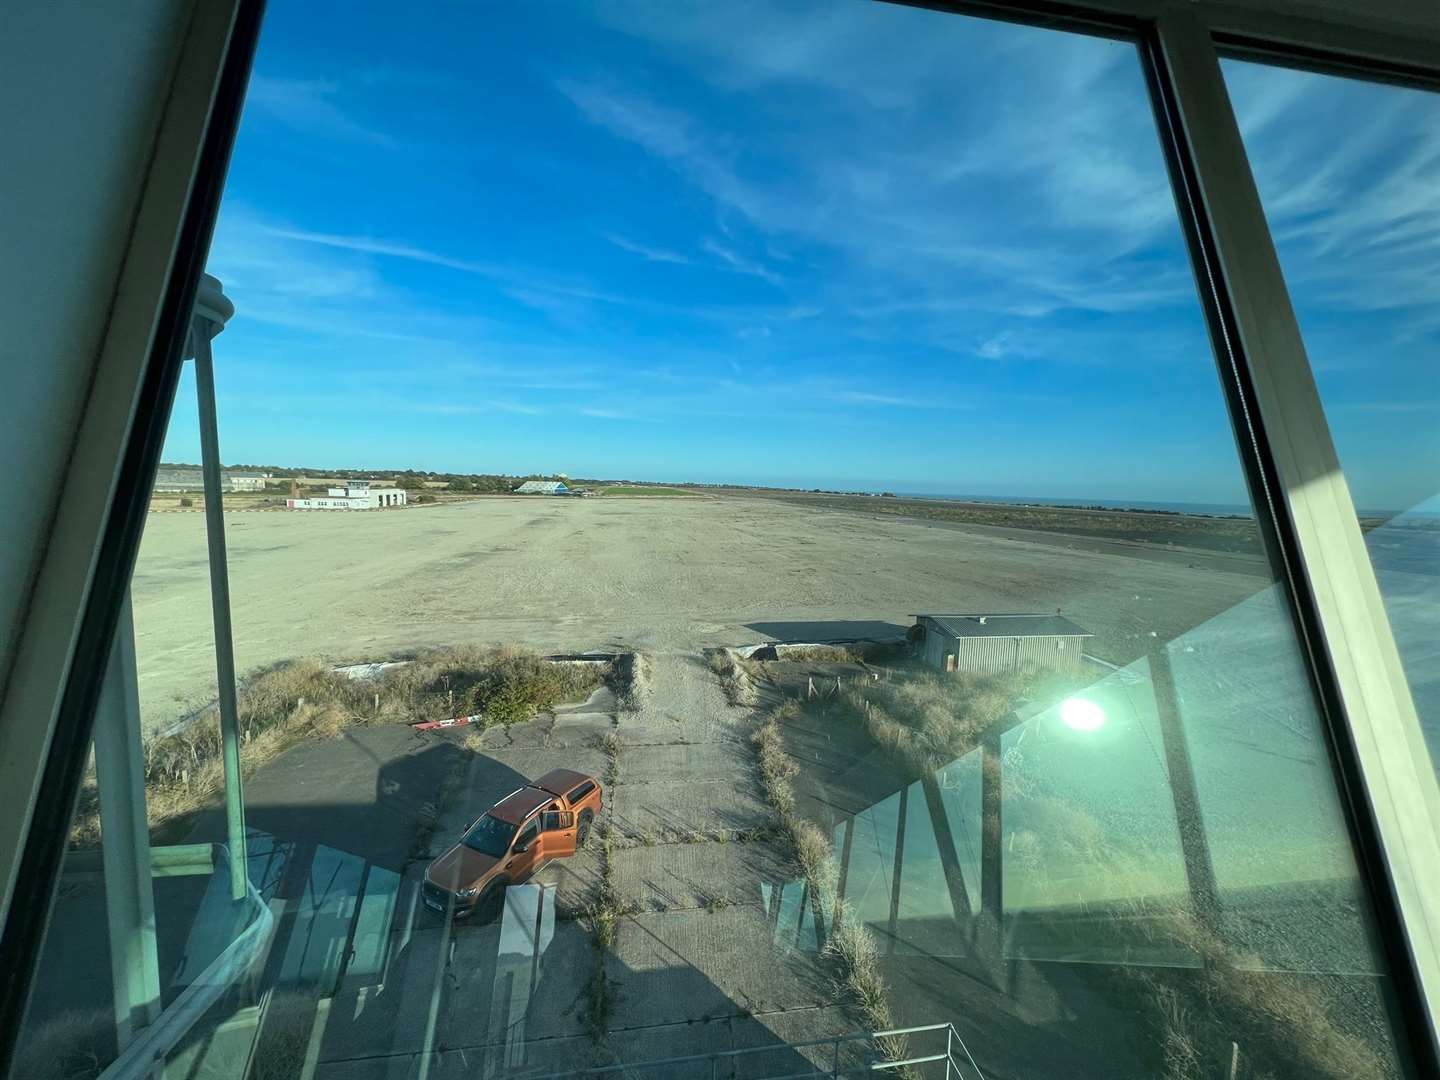 Looking out across the runway from the control tower